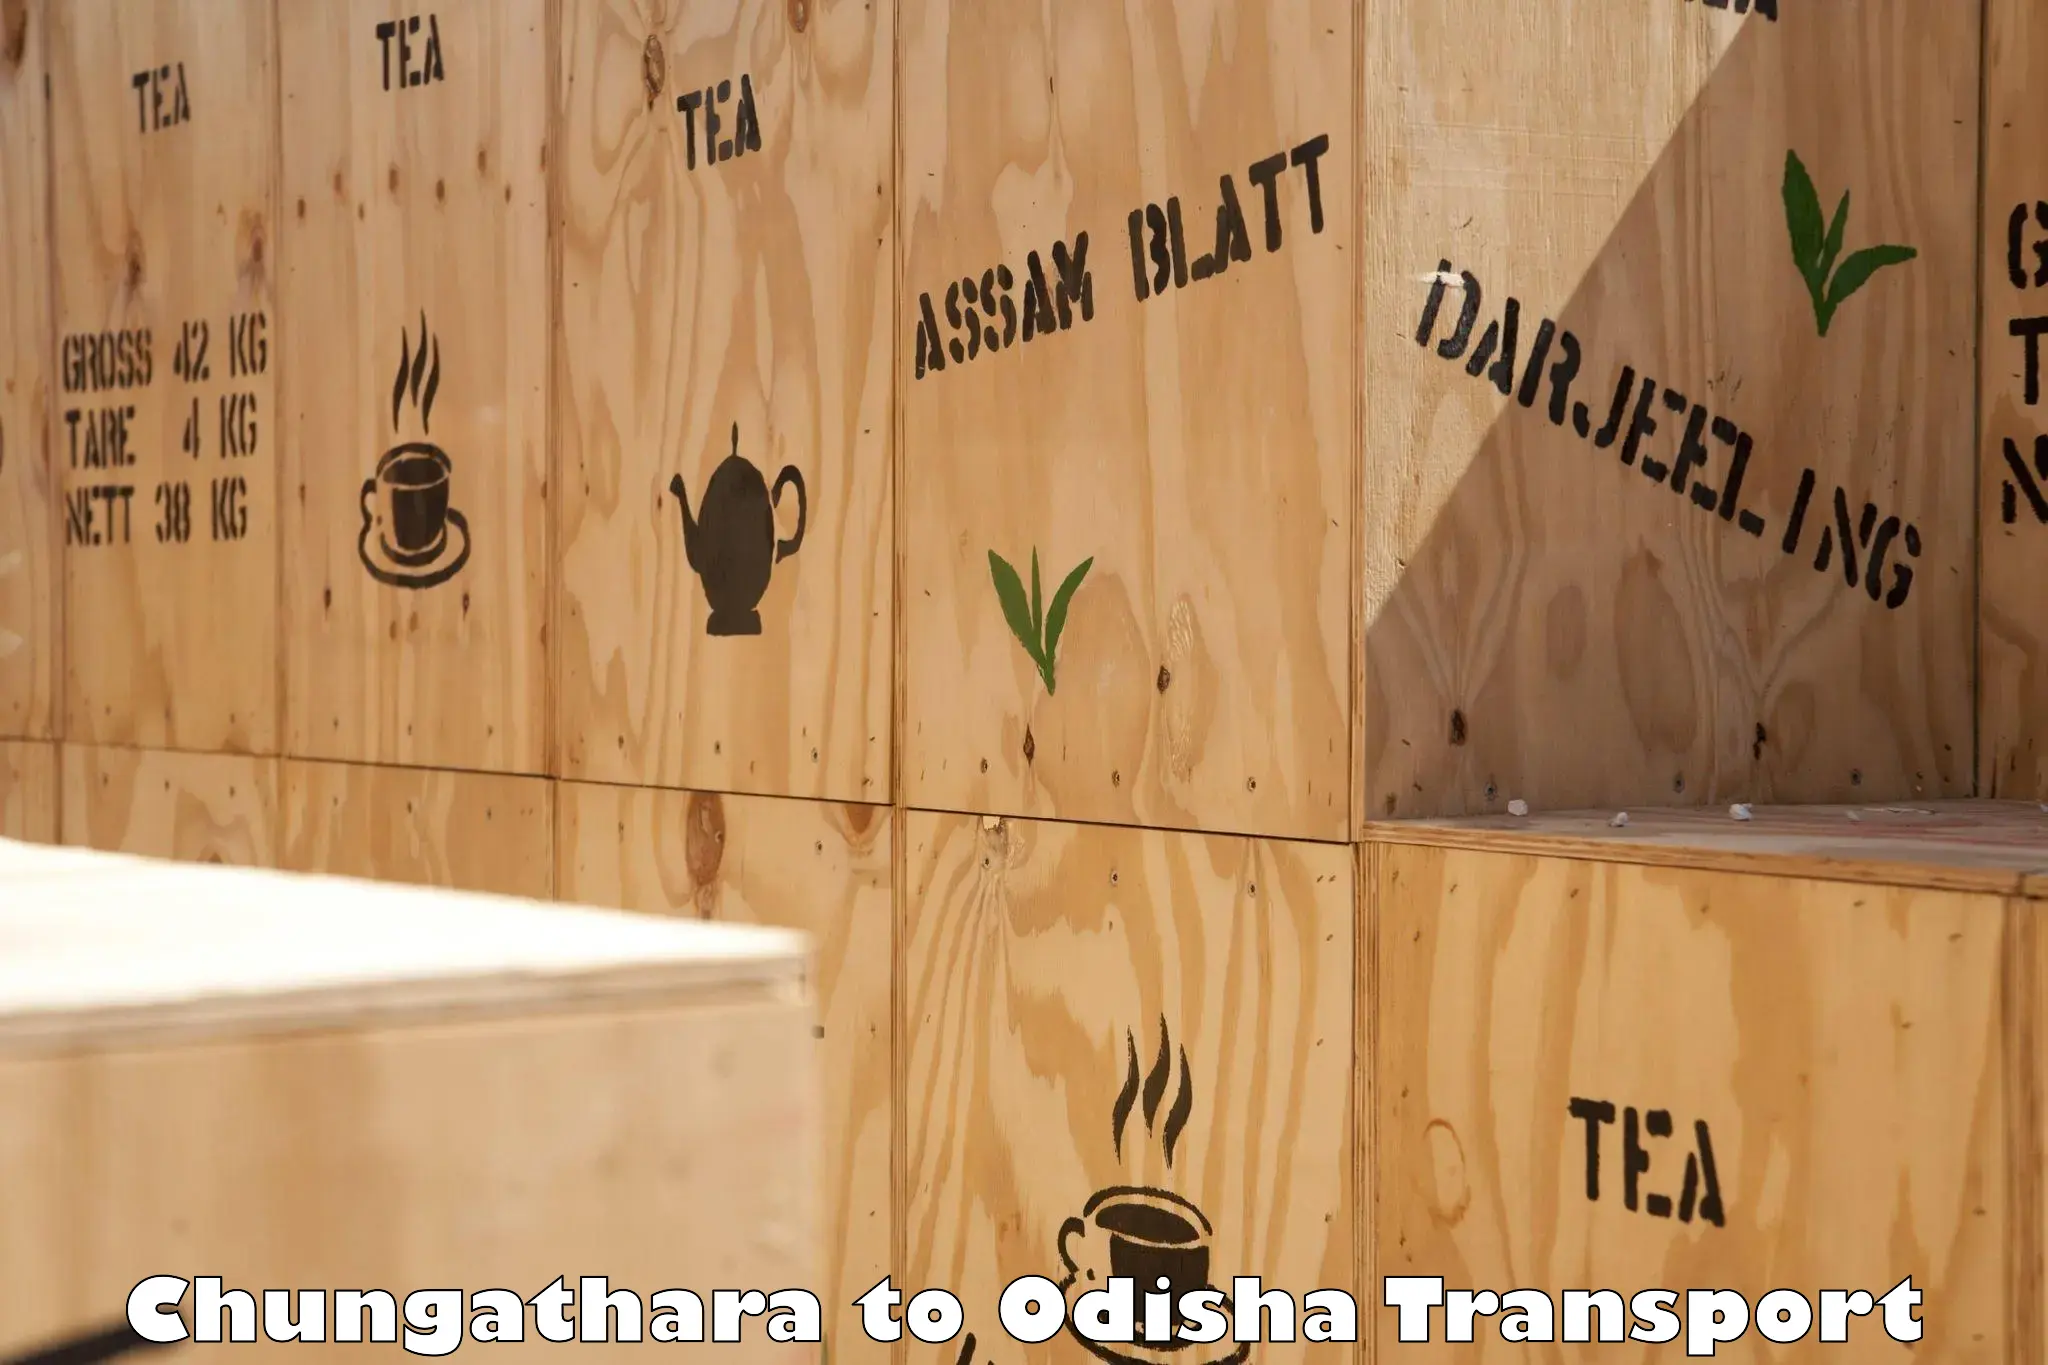 Container transport service Chungathara to Bissam Cuttack